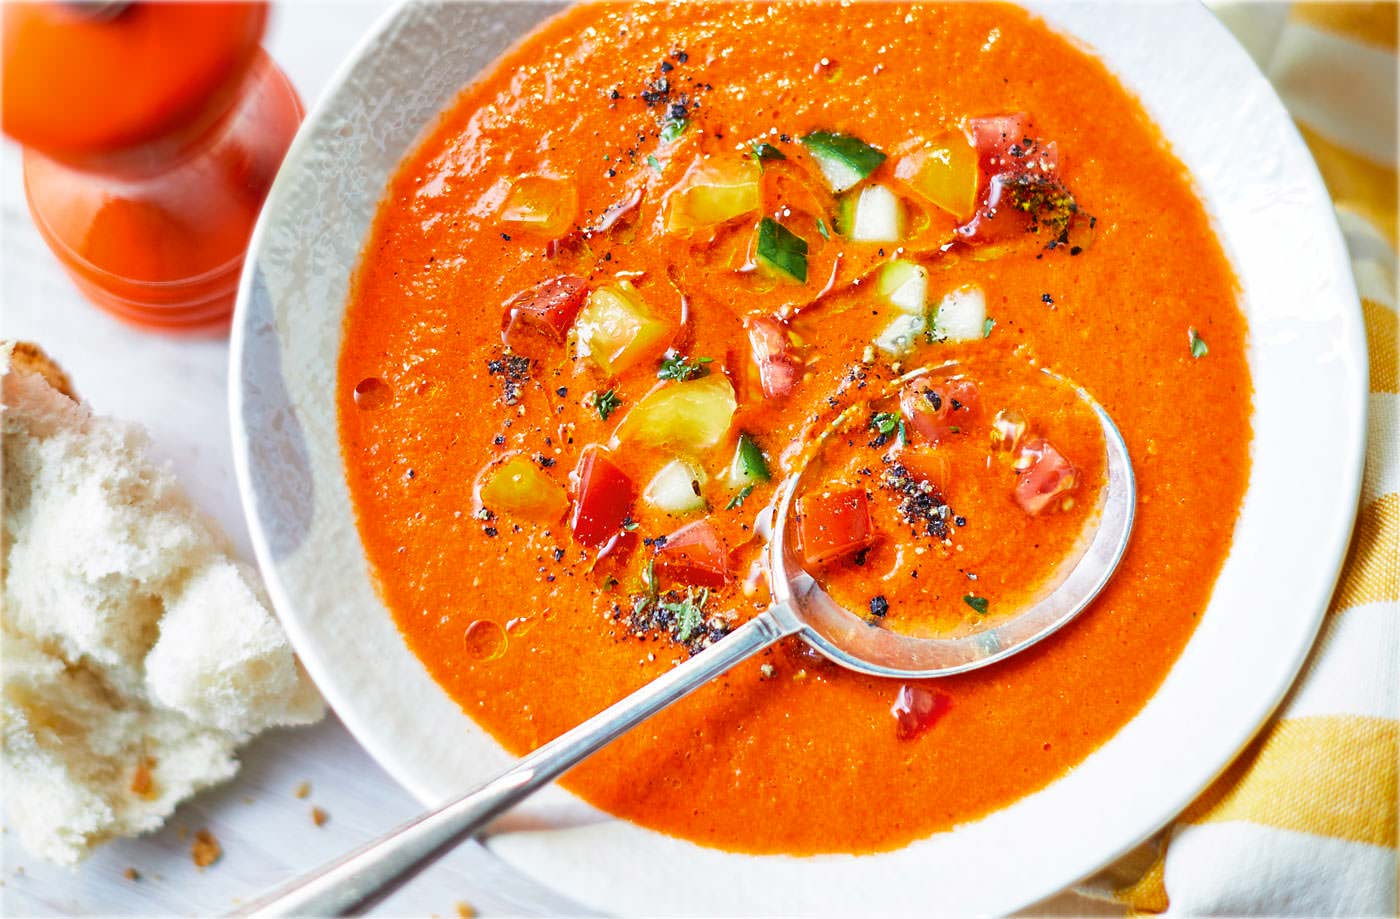 Only a Posh Person Will Have Eaten at Least 11/21 of These Foods Gazpacho